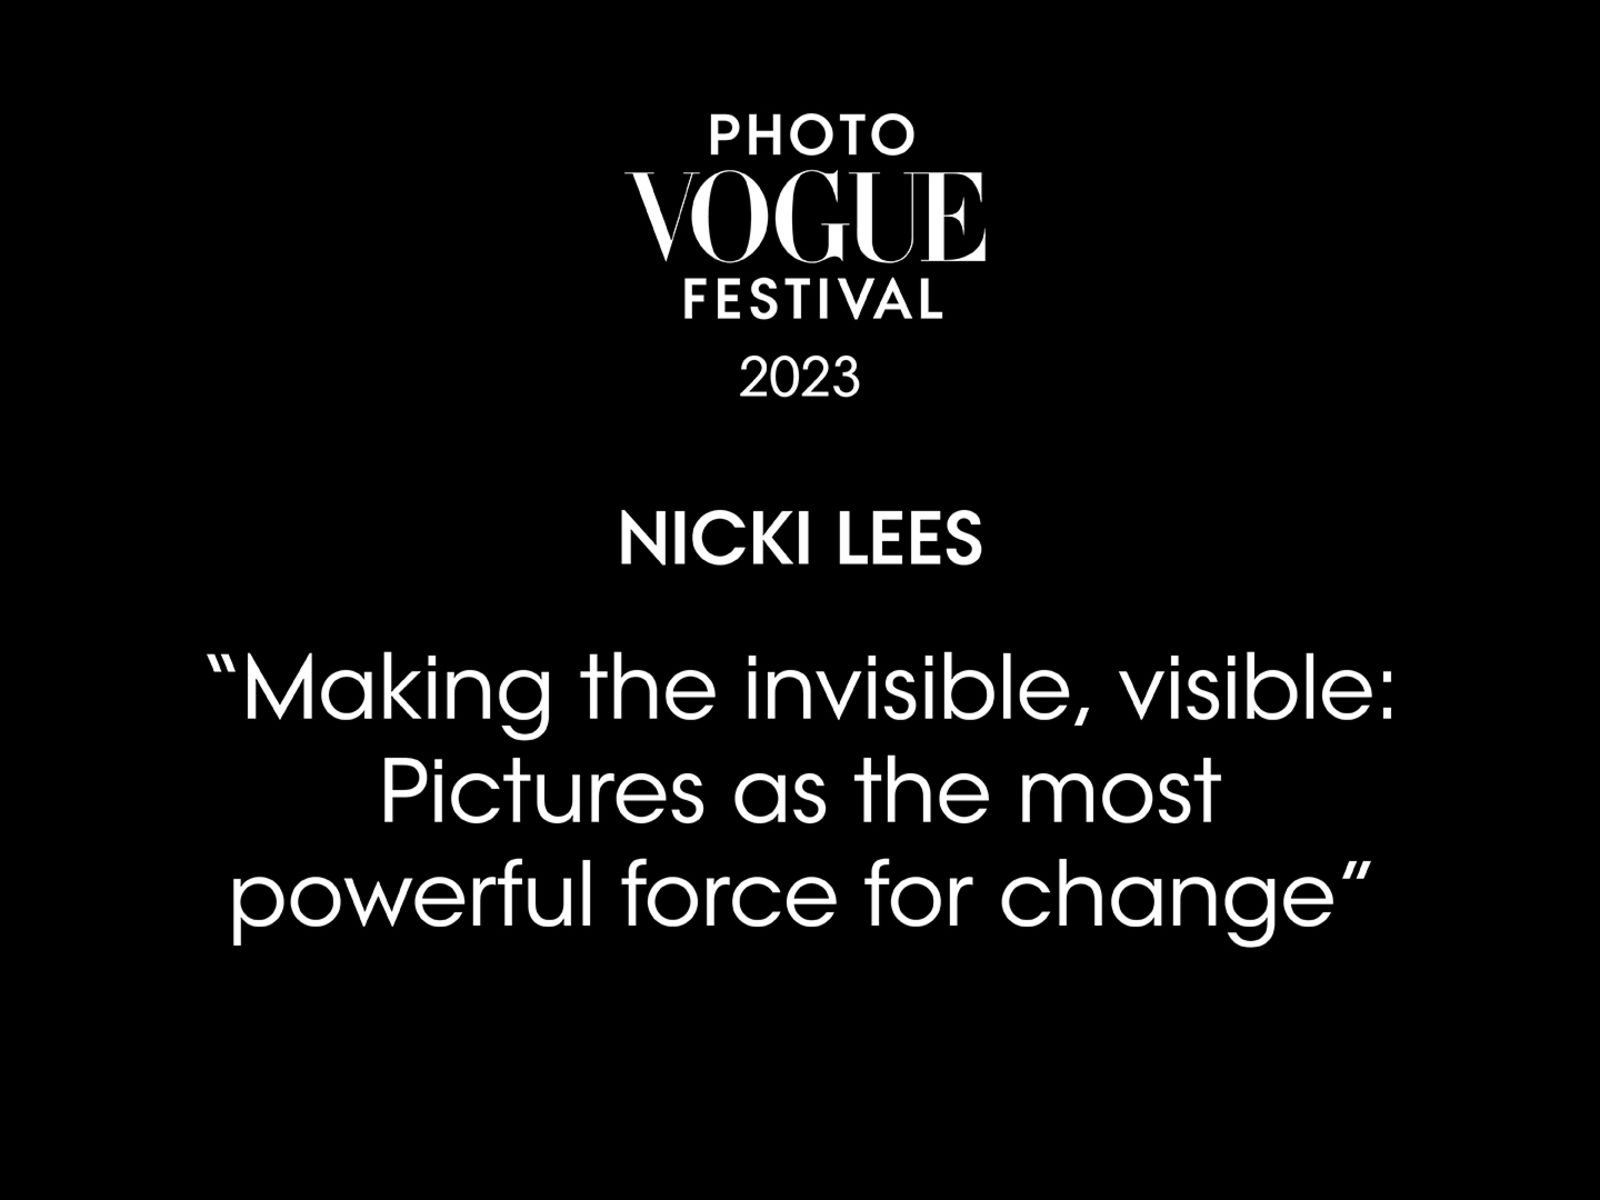 Making the invisible, visible: Pictures as the most powerful force for change | PhotoVogue Festival 2023: What Makes Us Human? Image in the Age of A.I.